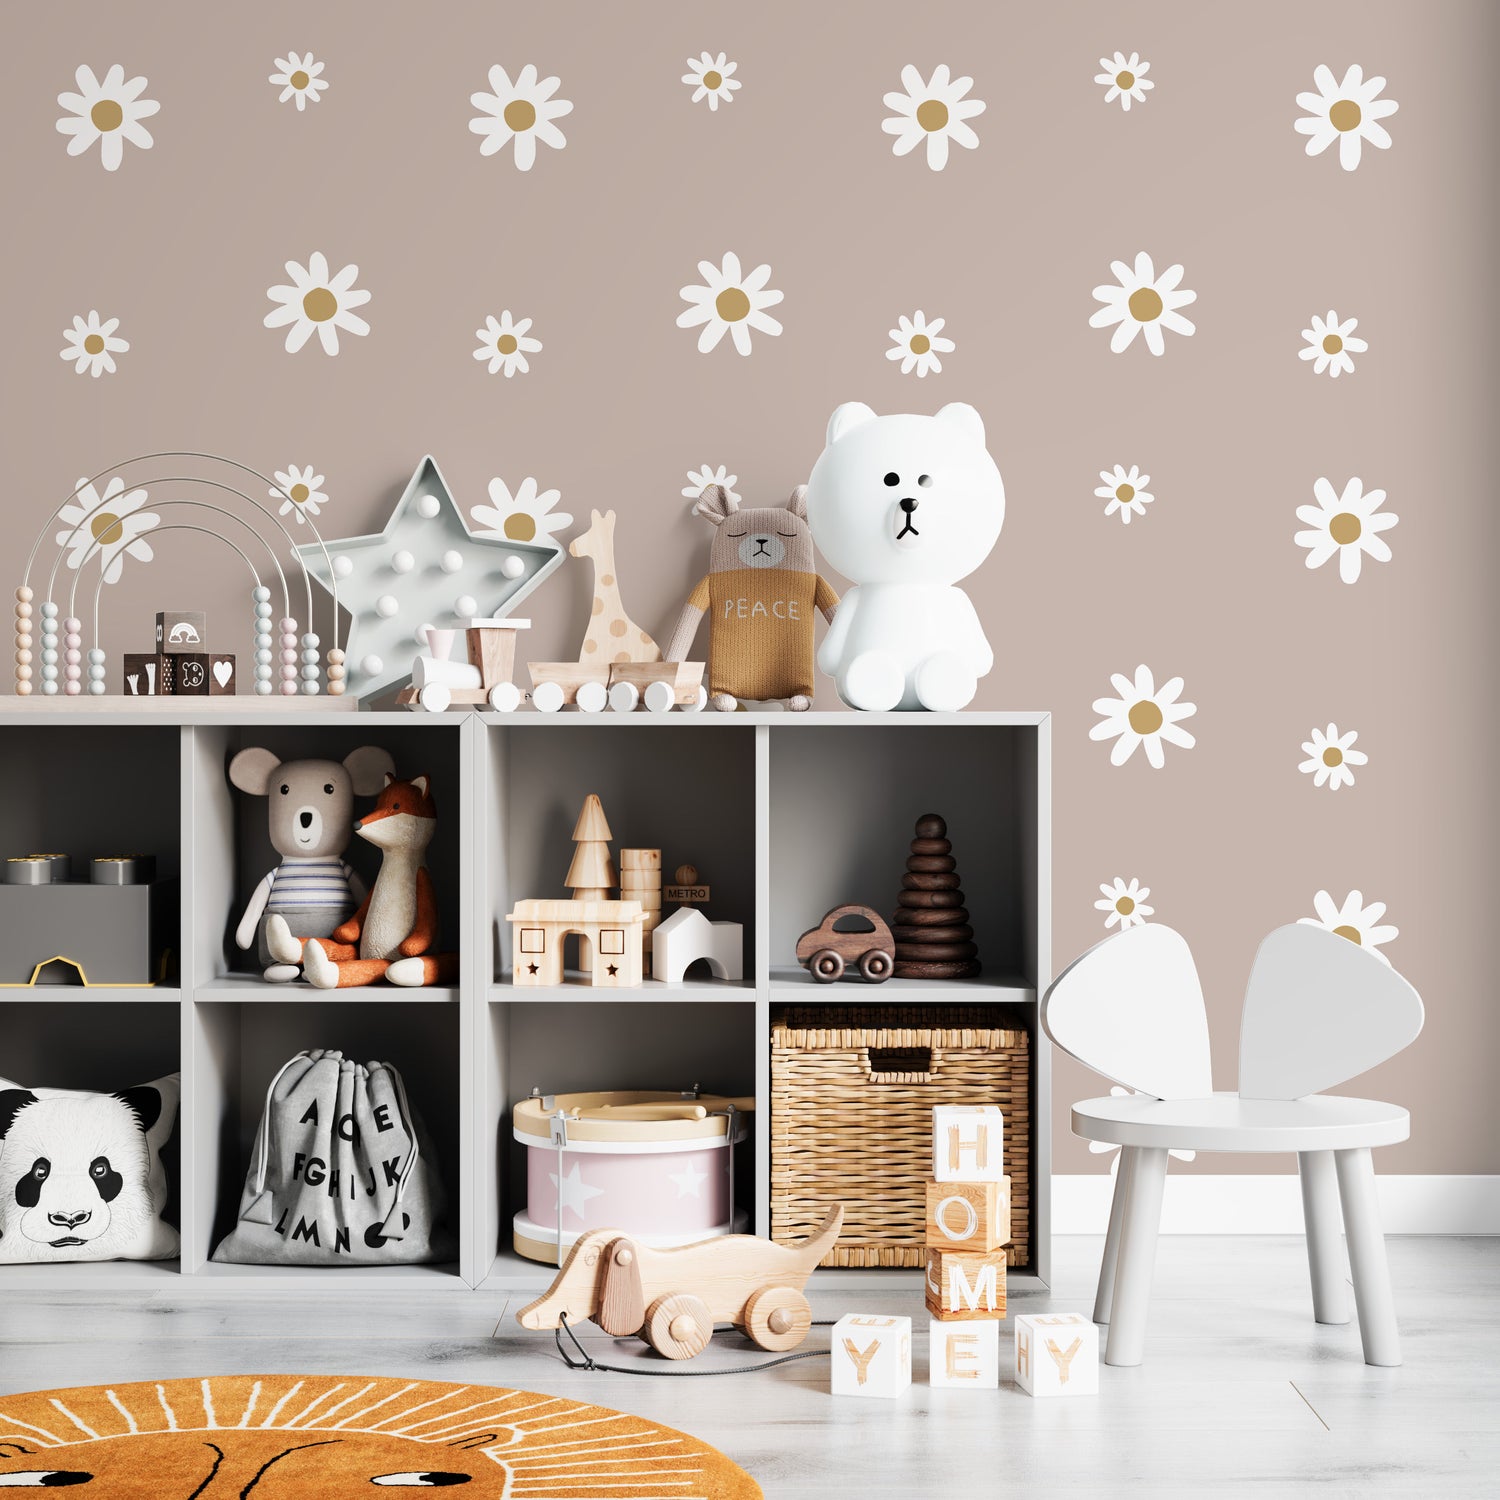 Large Daisy Floral Wallpaper Repeat Pattern - Munks and Me Wallpaper